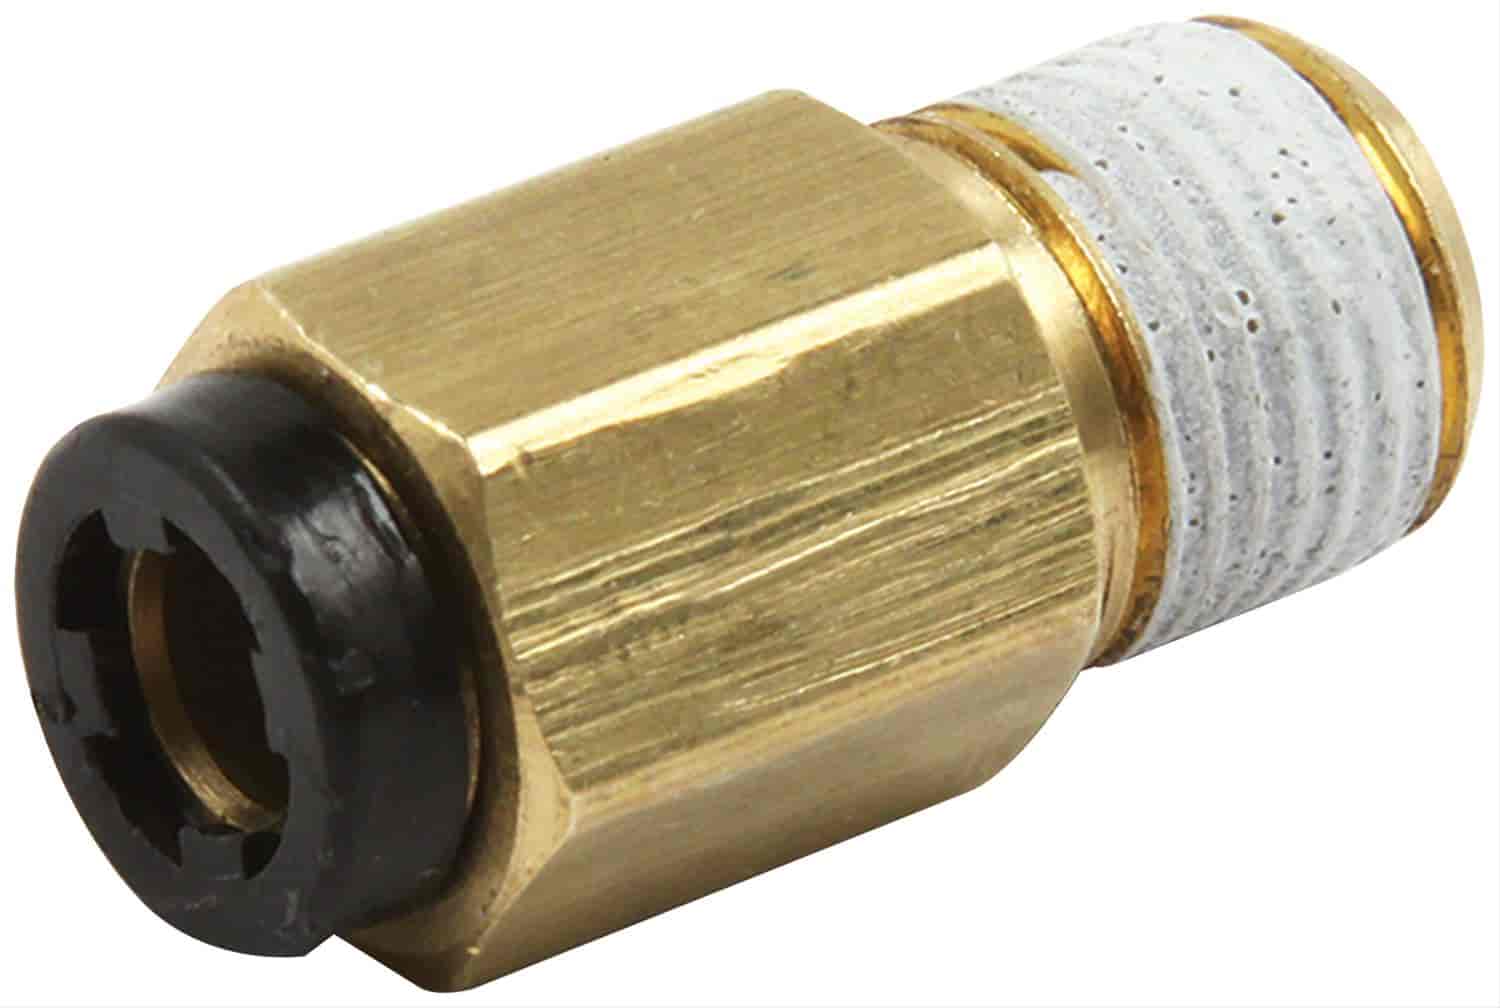 Adapter Fitting 1/8" NPT Male To Push Lock Hose